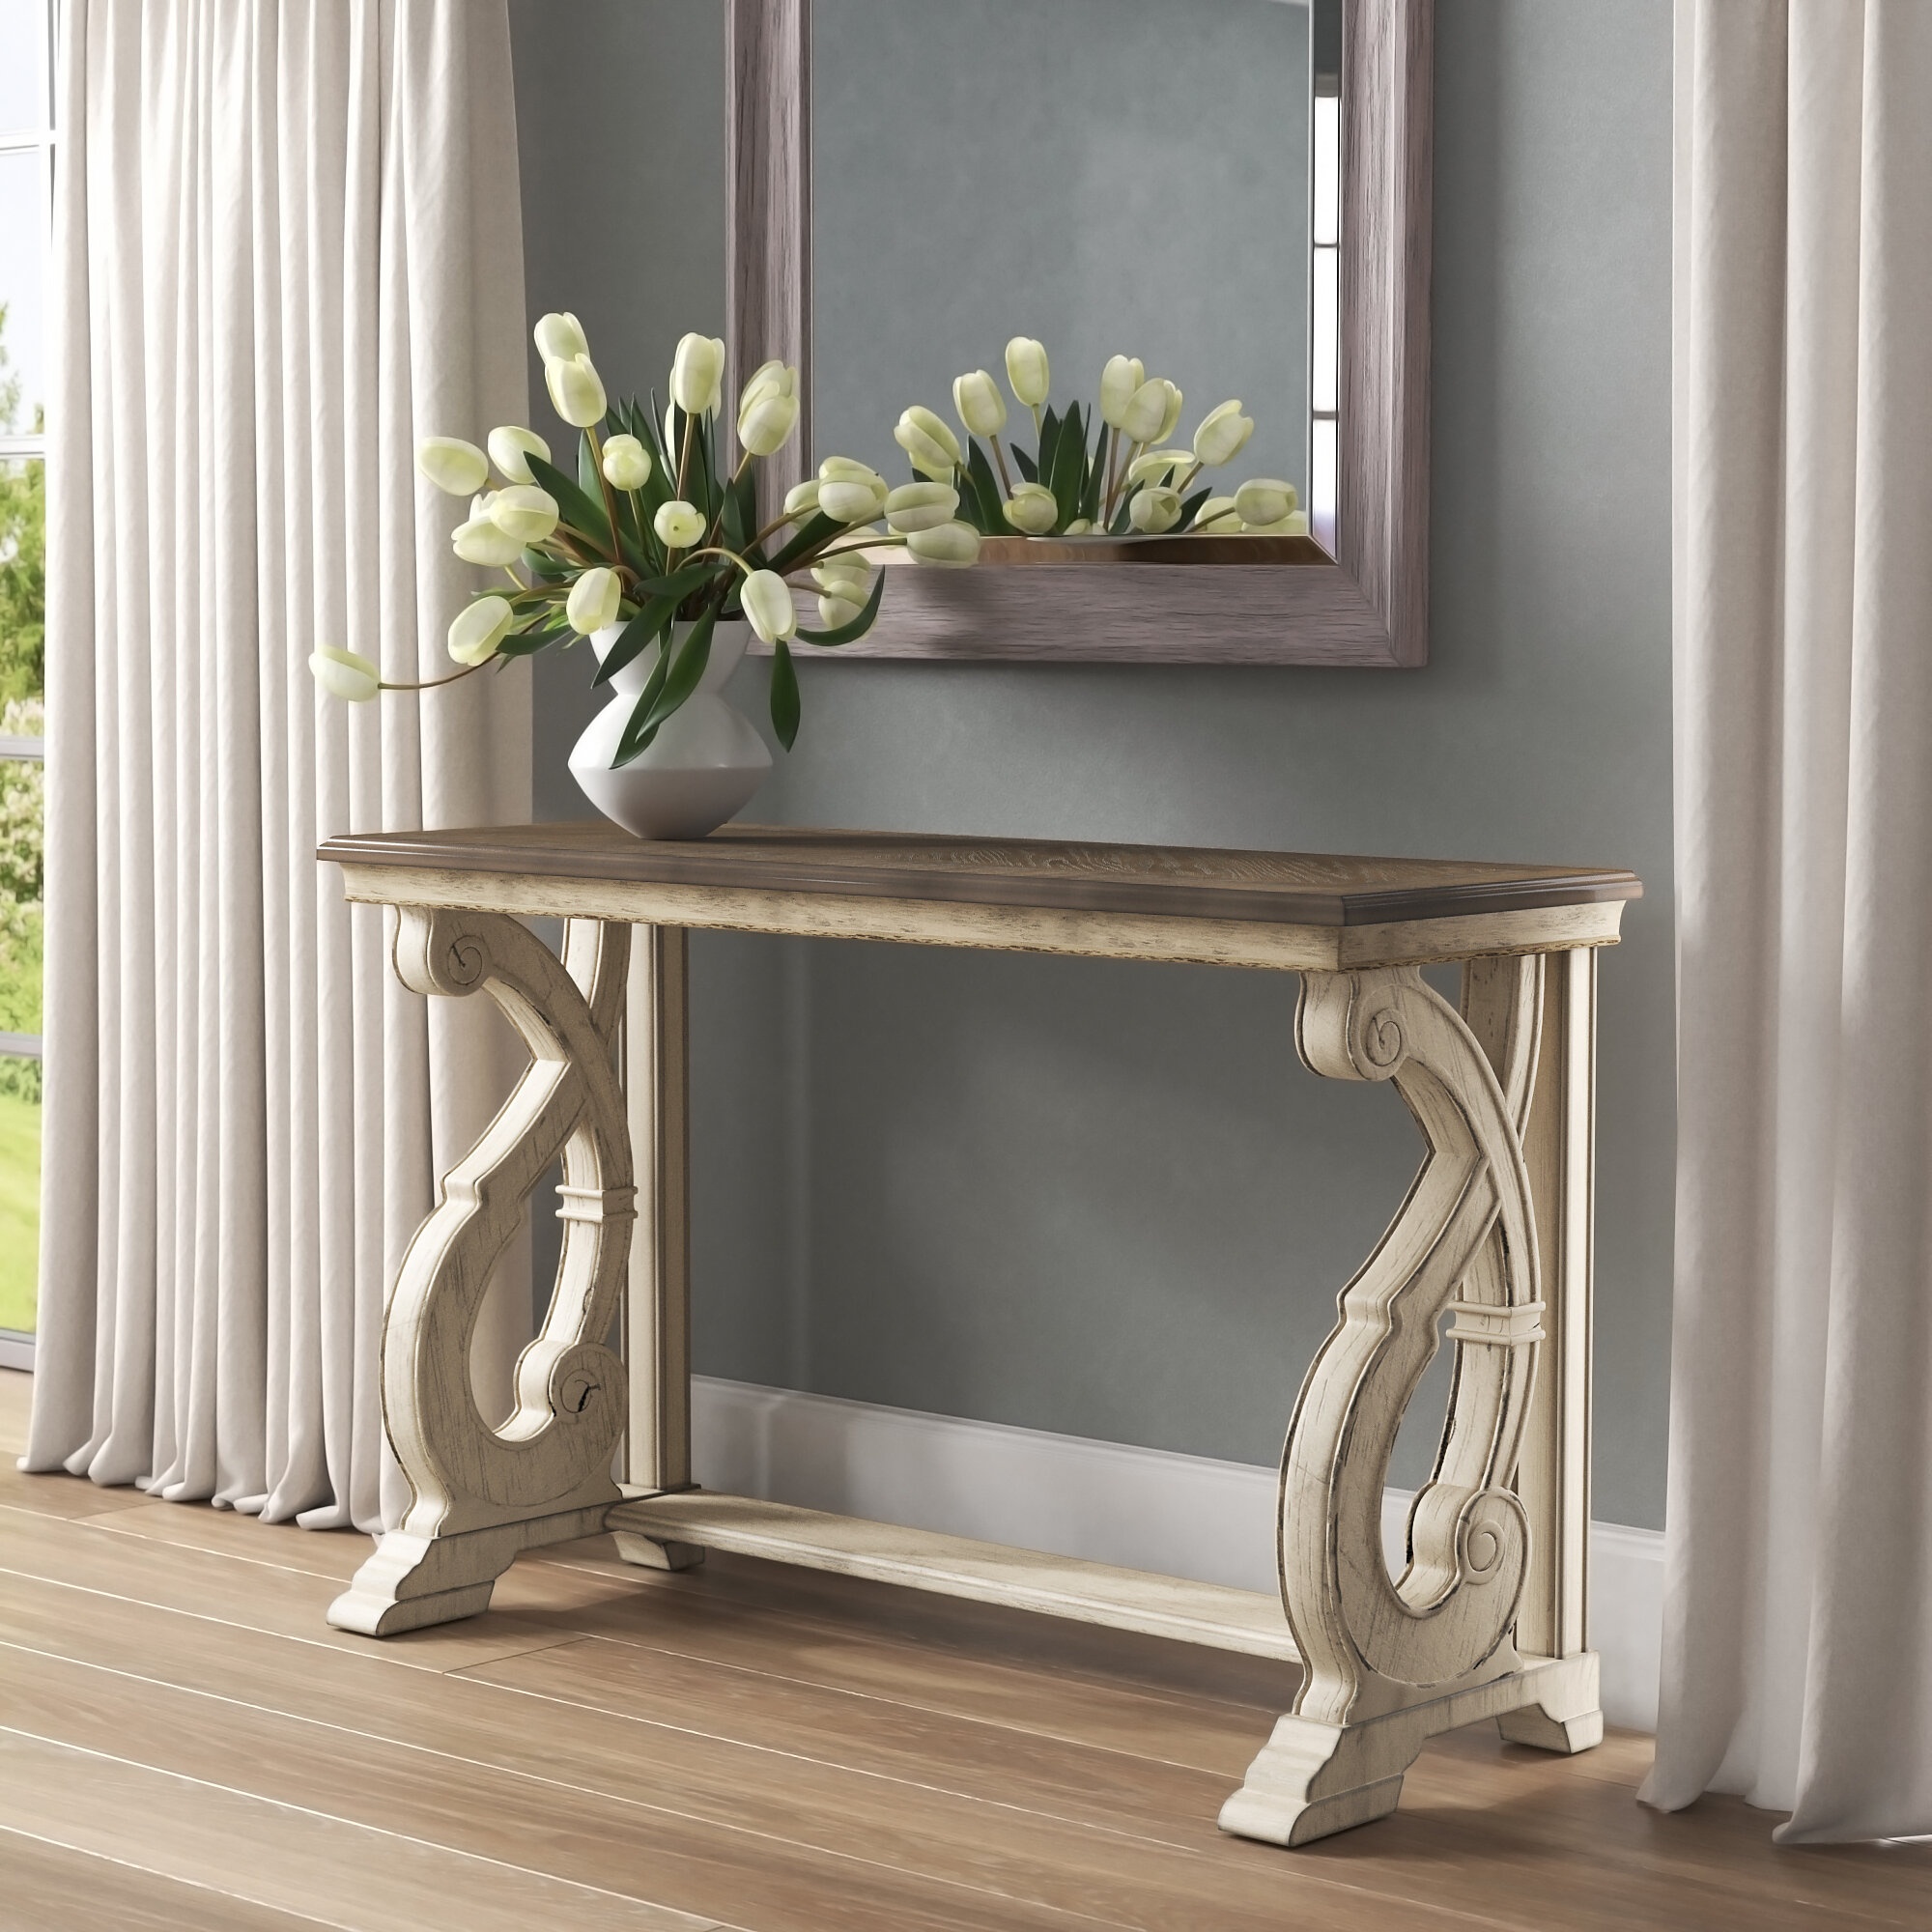 Shabby Chic Console Table - VisualHunt